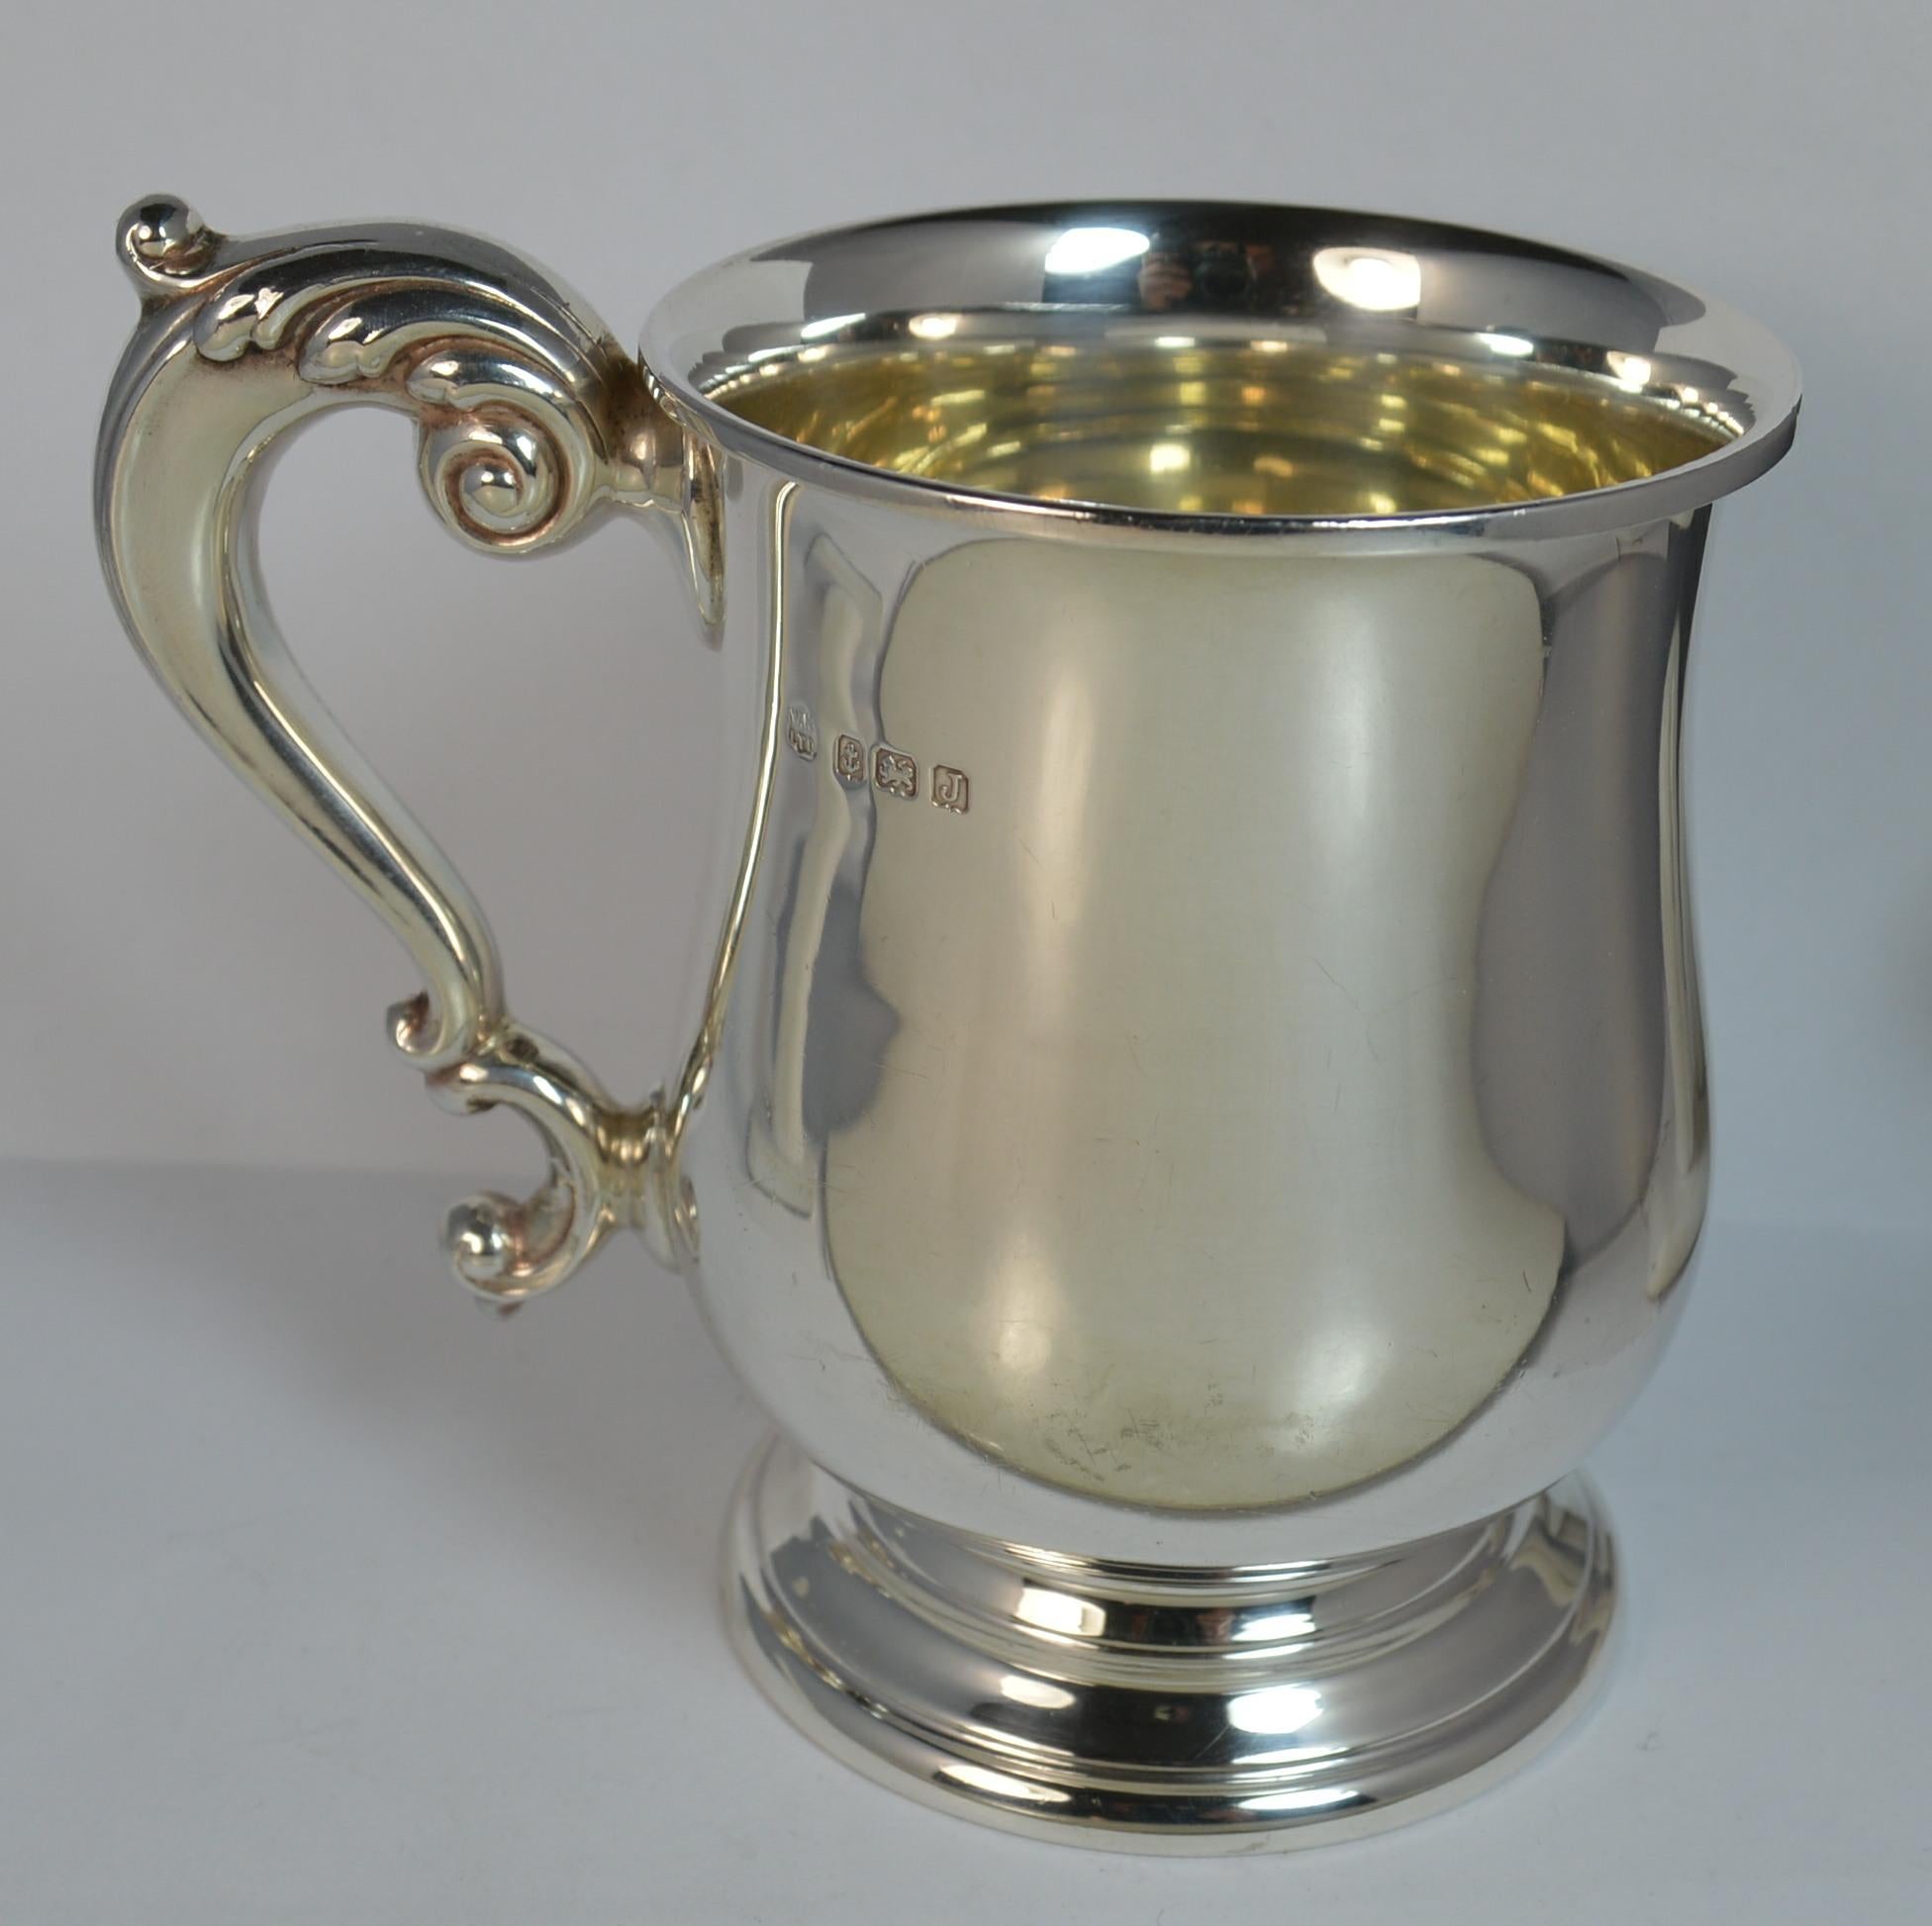 

A beautiful sterling silver Christening cup or mug. Solid heavy gauge of sterling silver. Plain bulbous shape to the tankard with floral handle.

Hallmarks ; lion, Birmingham assay, date letter J, makers marks
Weight ; 213.6 grams
Size ; 110mm x